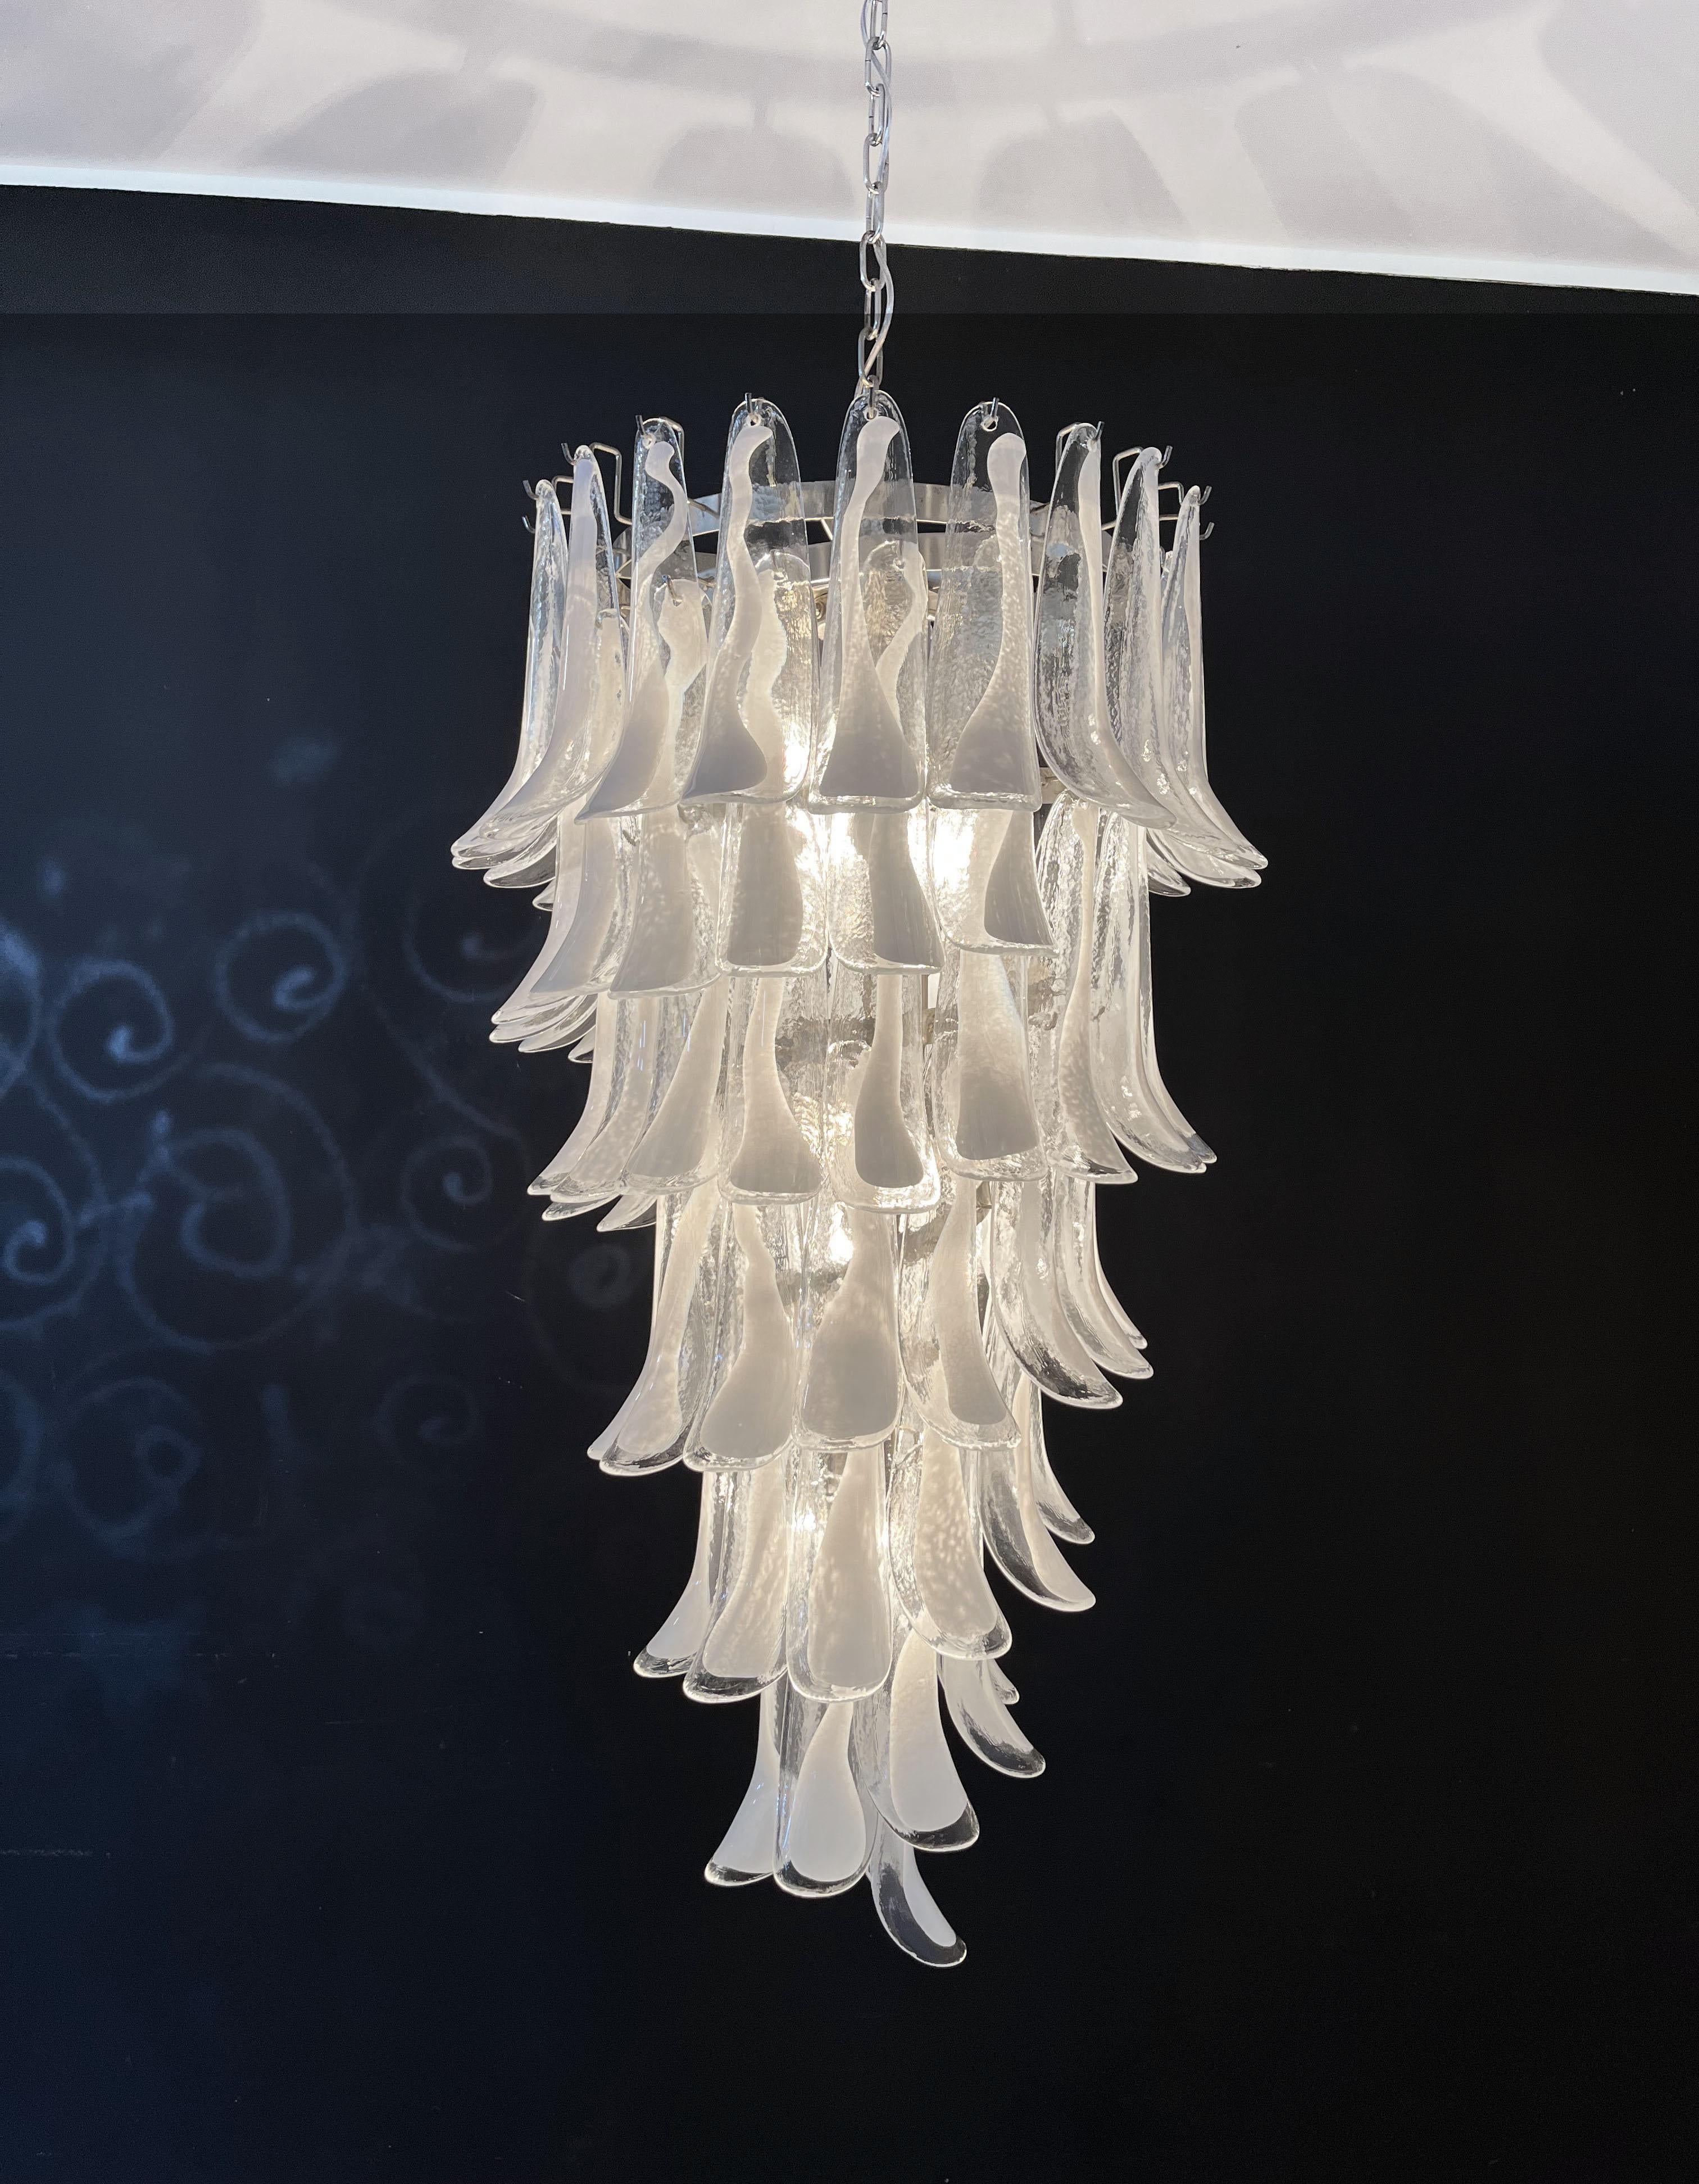 Beautiful and huge Italian Murano chandelier composed of 83 splendid glass petals (transparent and white “lattimo”) that give a very elegant look. The glasses of this chandelier are real works of art. The glasses descend with a spiral